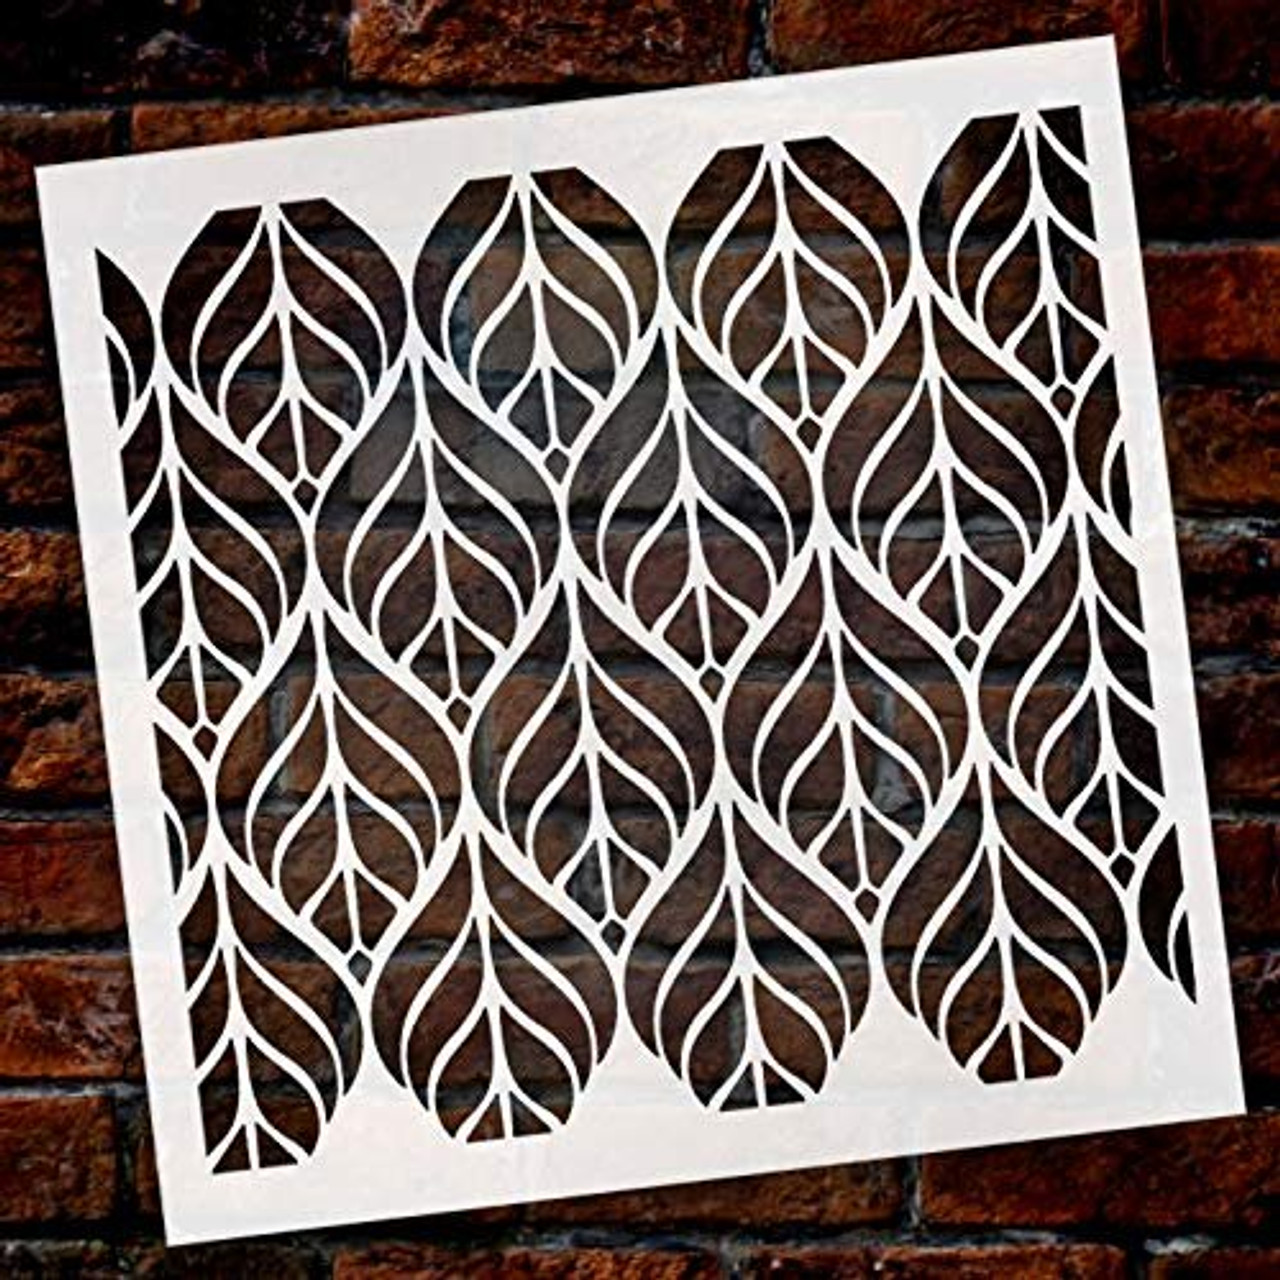 Fun with Shapes Abstract Leaf Nature Stencil StudioR12 | Wood Sign | Reusable Mylar Template | Wall Decor | Multi Layering Art Project | Journal Art Deco | DIY Home - Choose Size